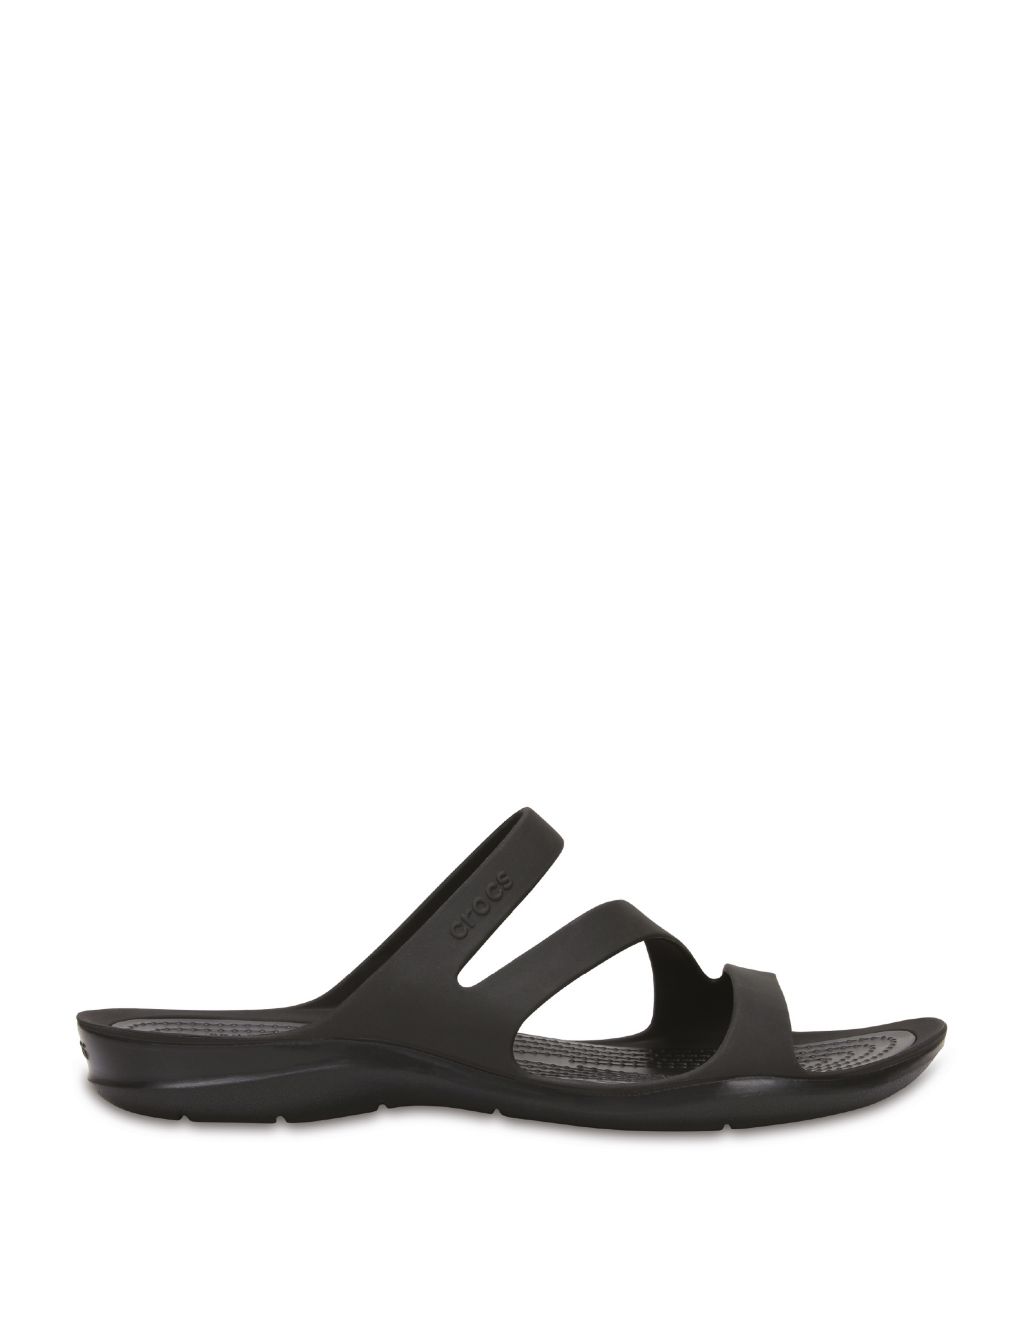 Swiftwater™ Strappy Sliders image 1